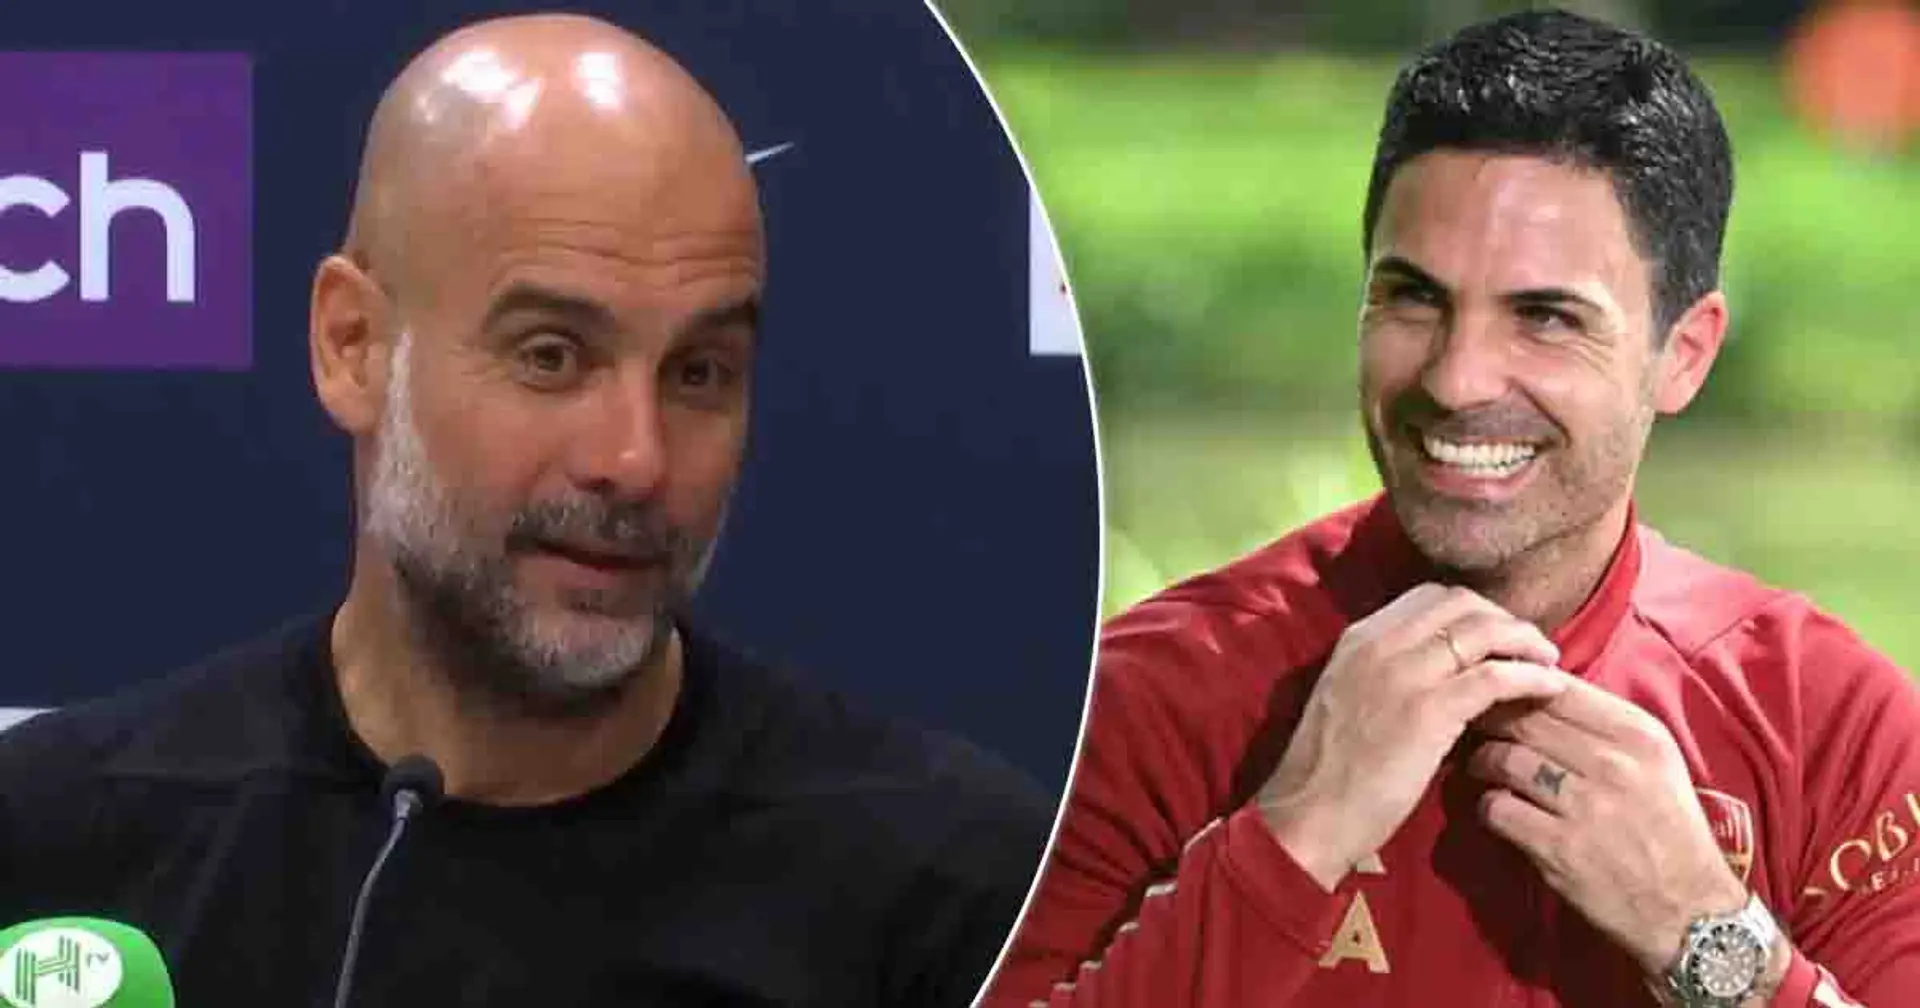 'He will not give up': Pep Guardiola pays ultimate compliment to Arteta as PL title race drags to final day